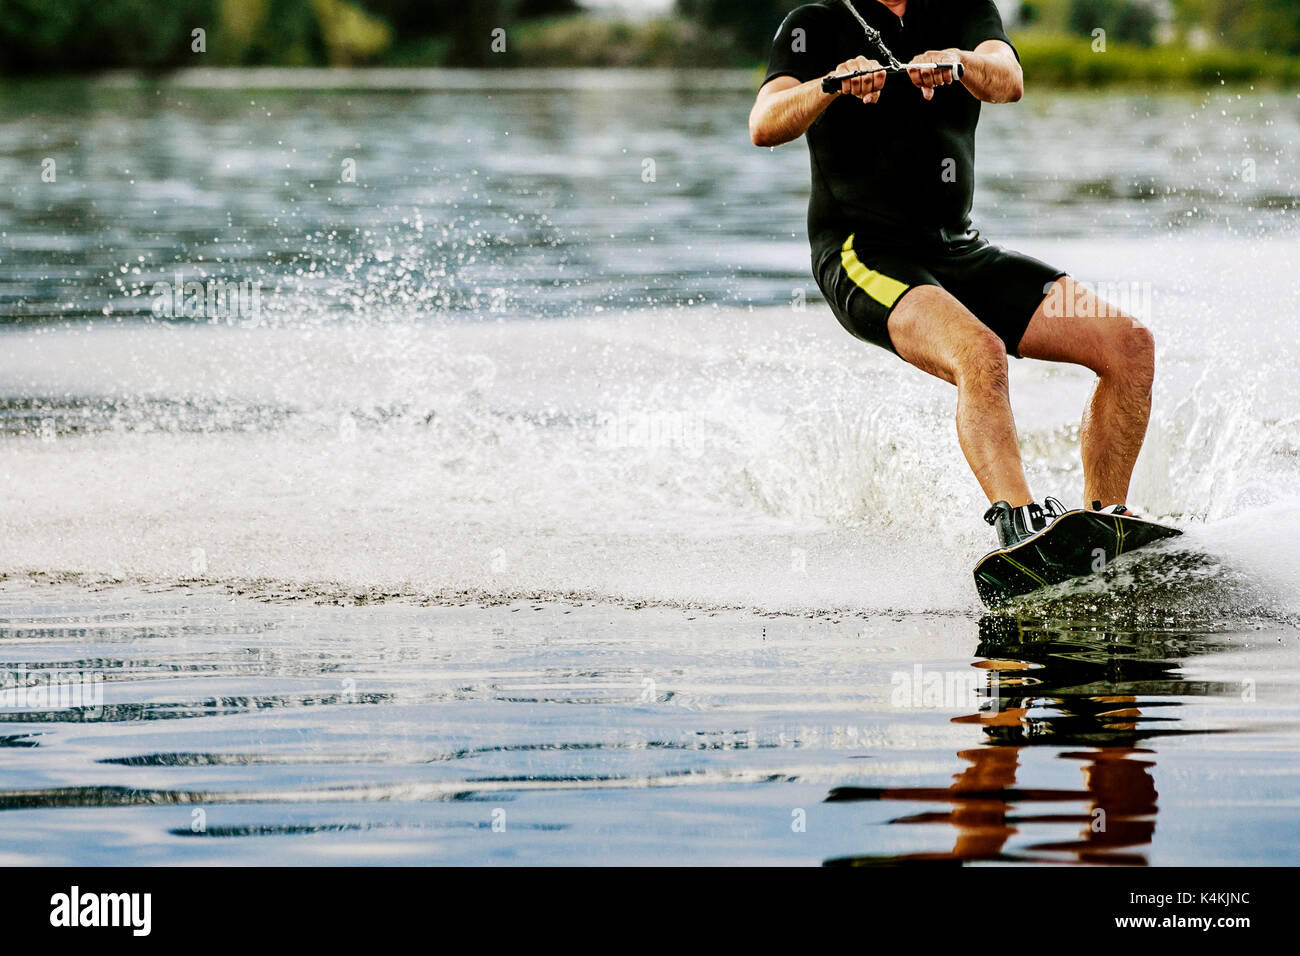 male wakeboarder rides on lake in wakeboard splashes of water Stock Photo